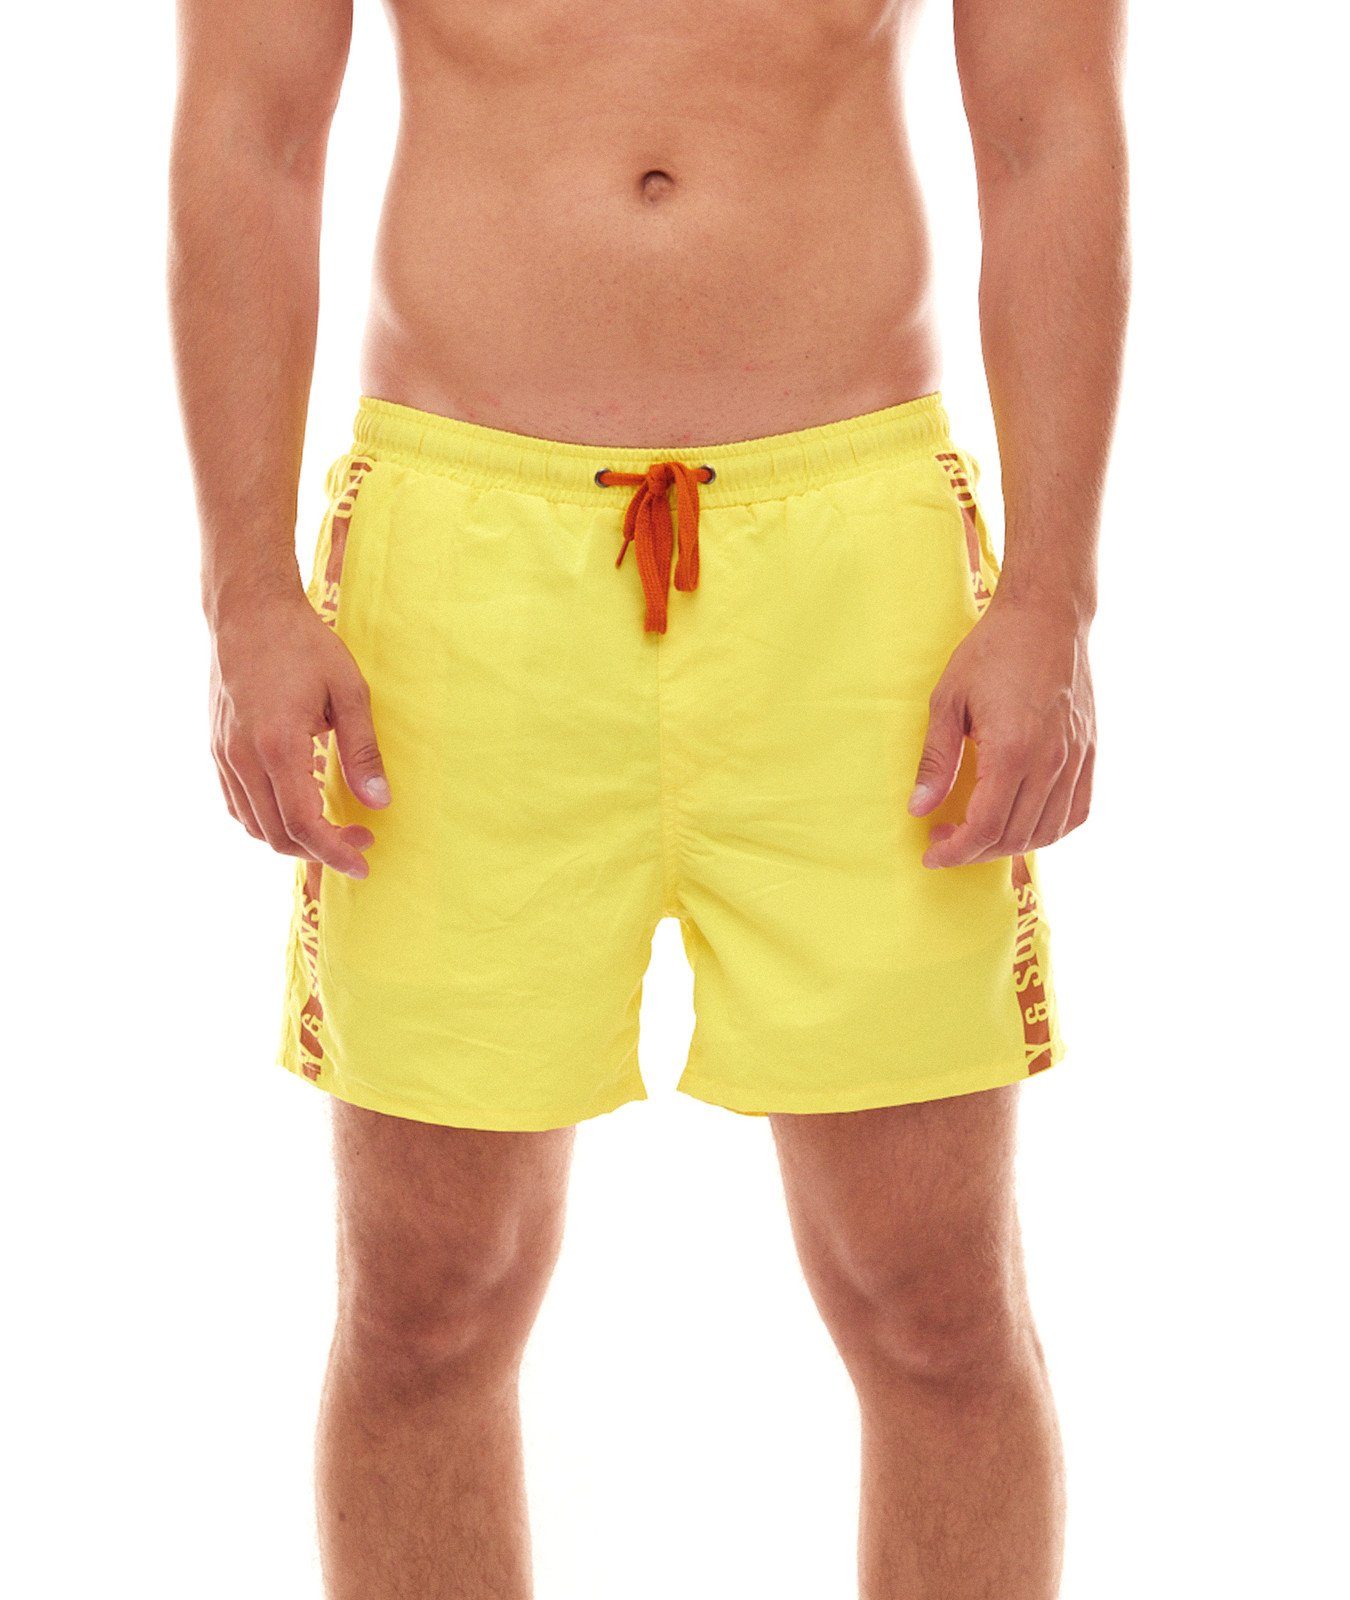 ONLY & SONS Stoffhose ONLY & SONS Herren Bade-Hose Schwimm-Shorts Ted Swim Print Badehose Gelb